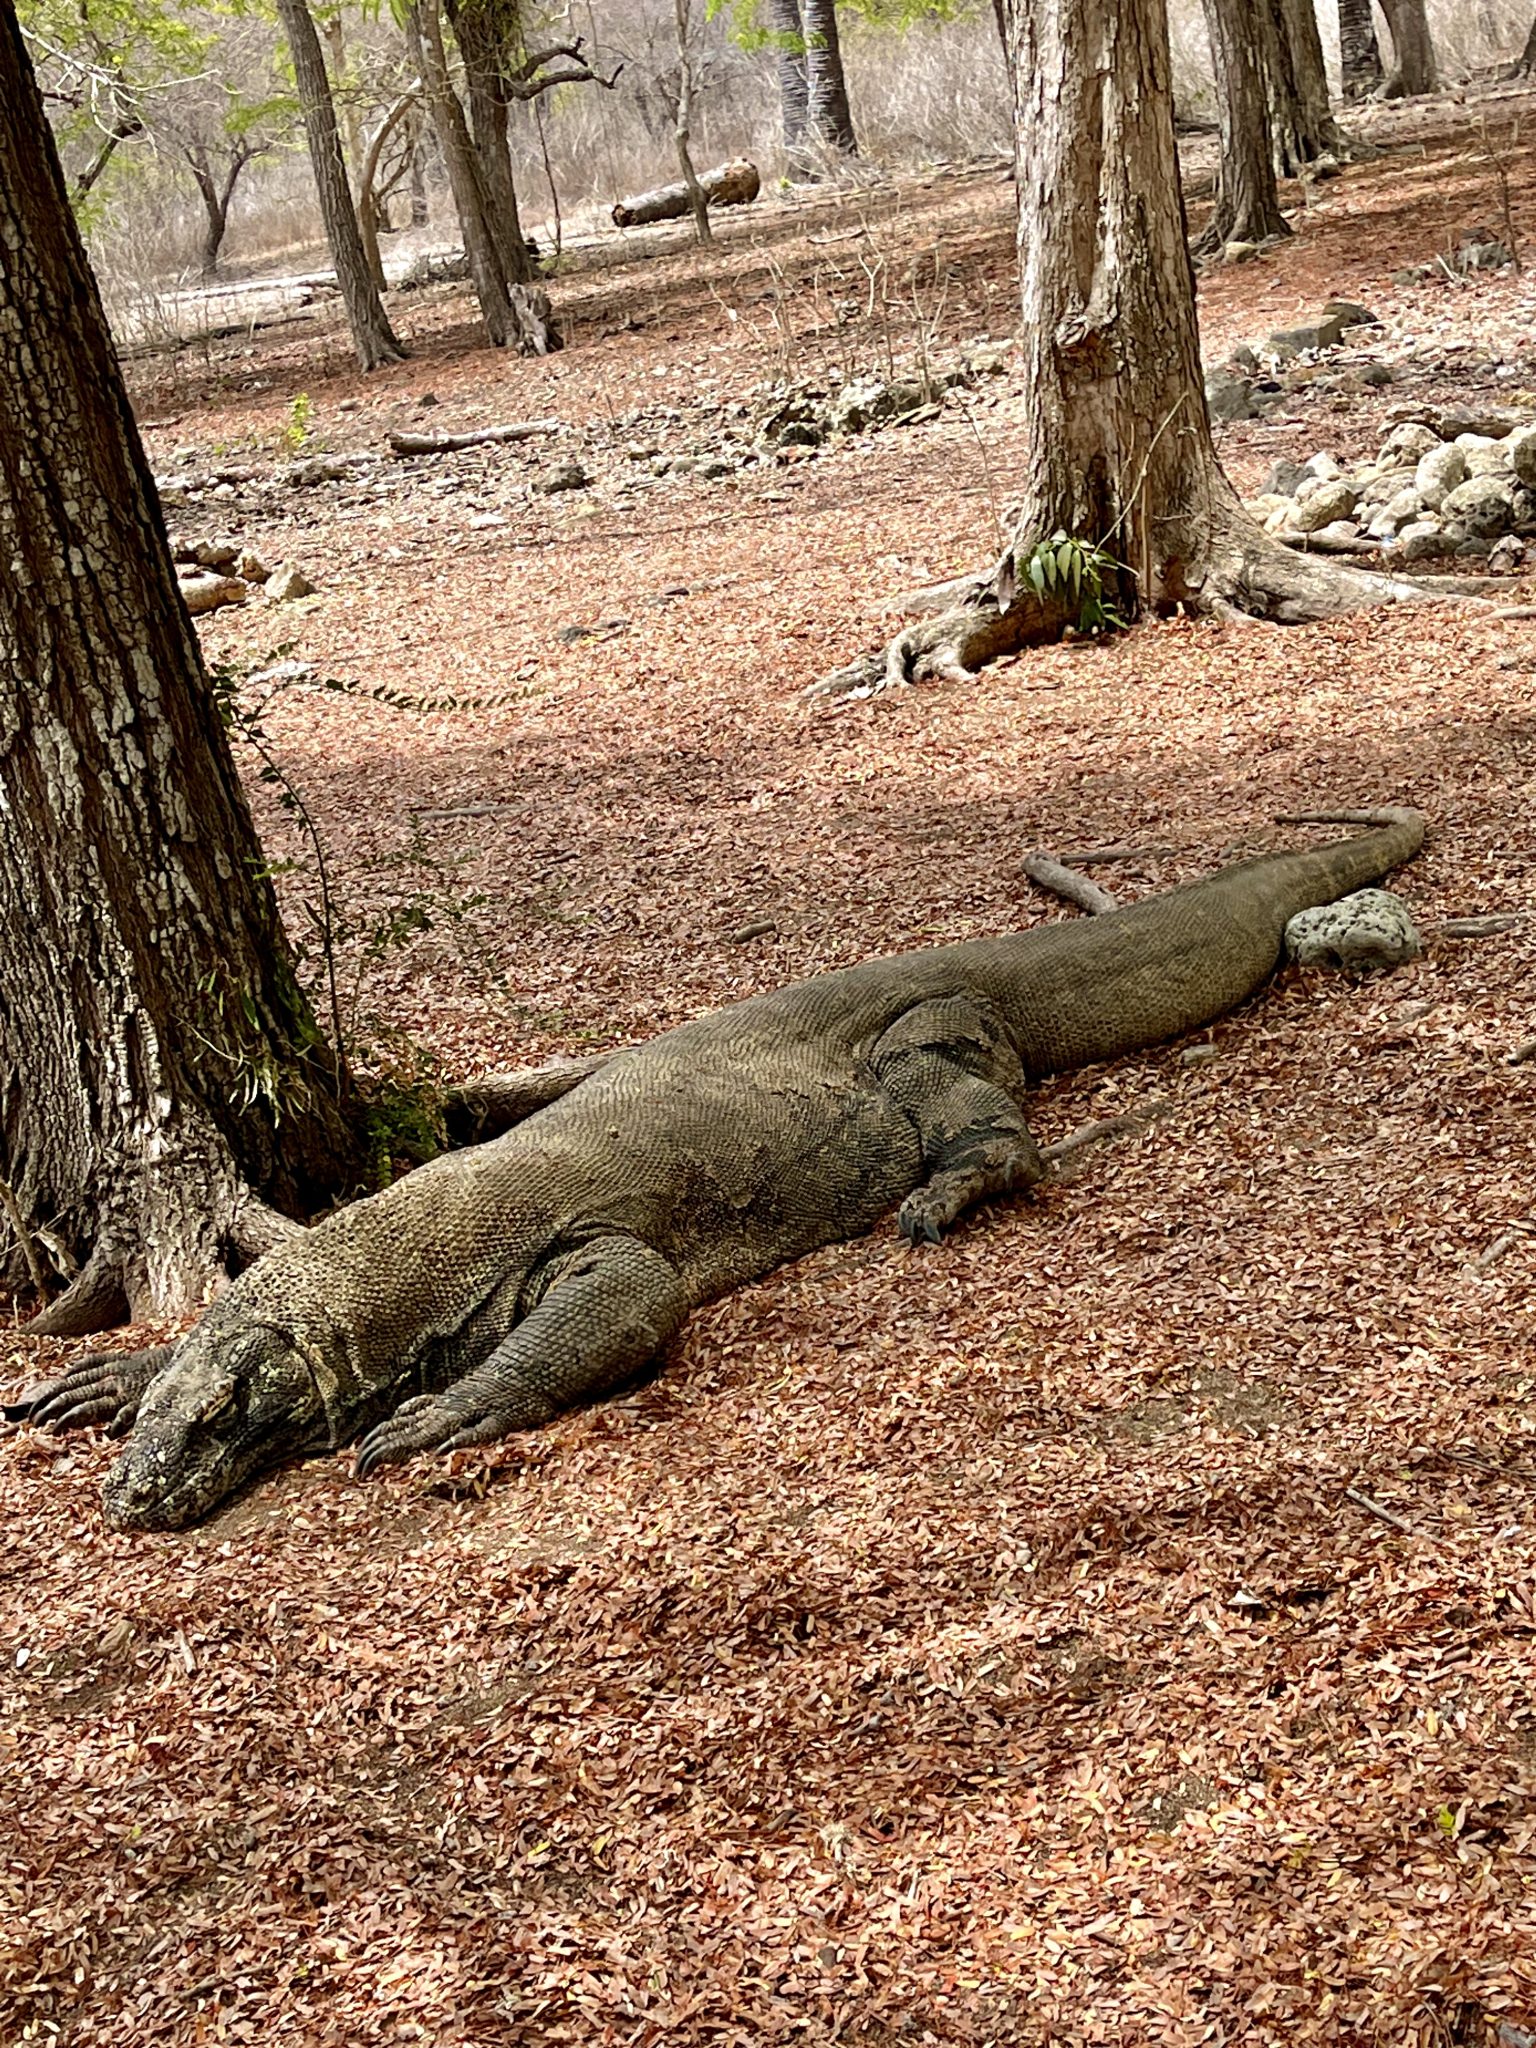 seeing Komodo Dragons in their natural habitat was a once-in-a-lifetime experience.